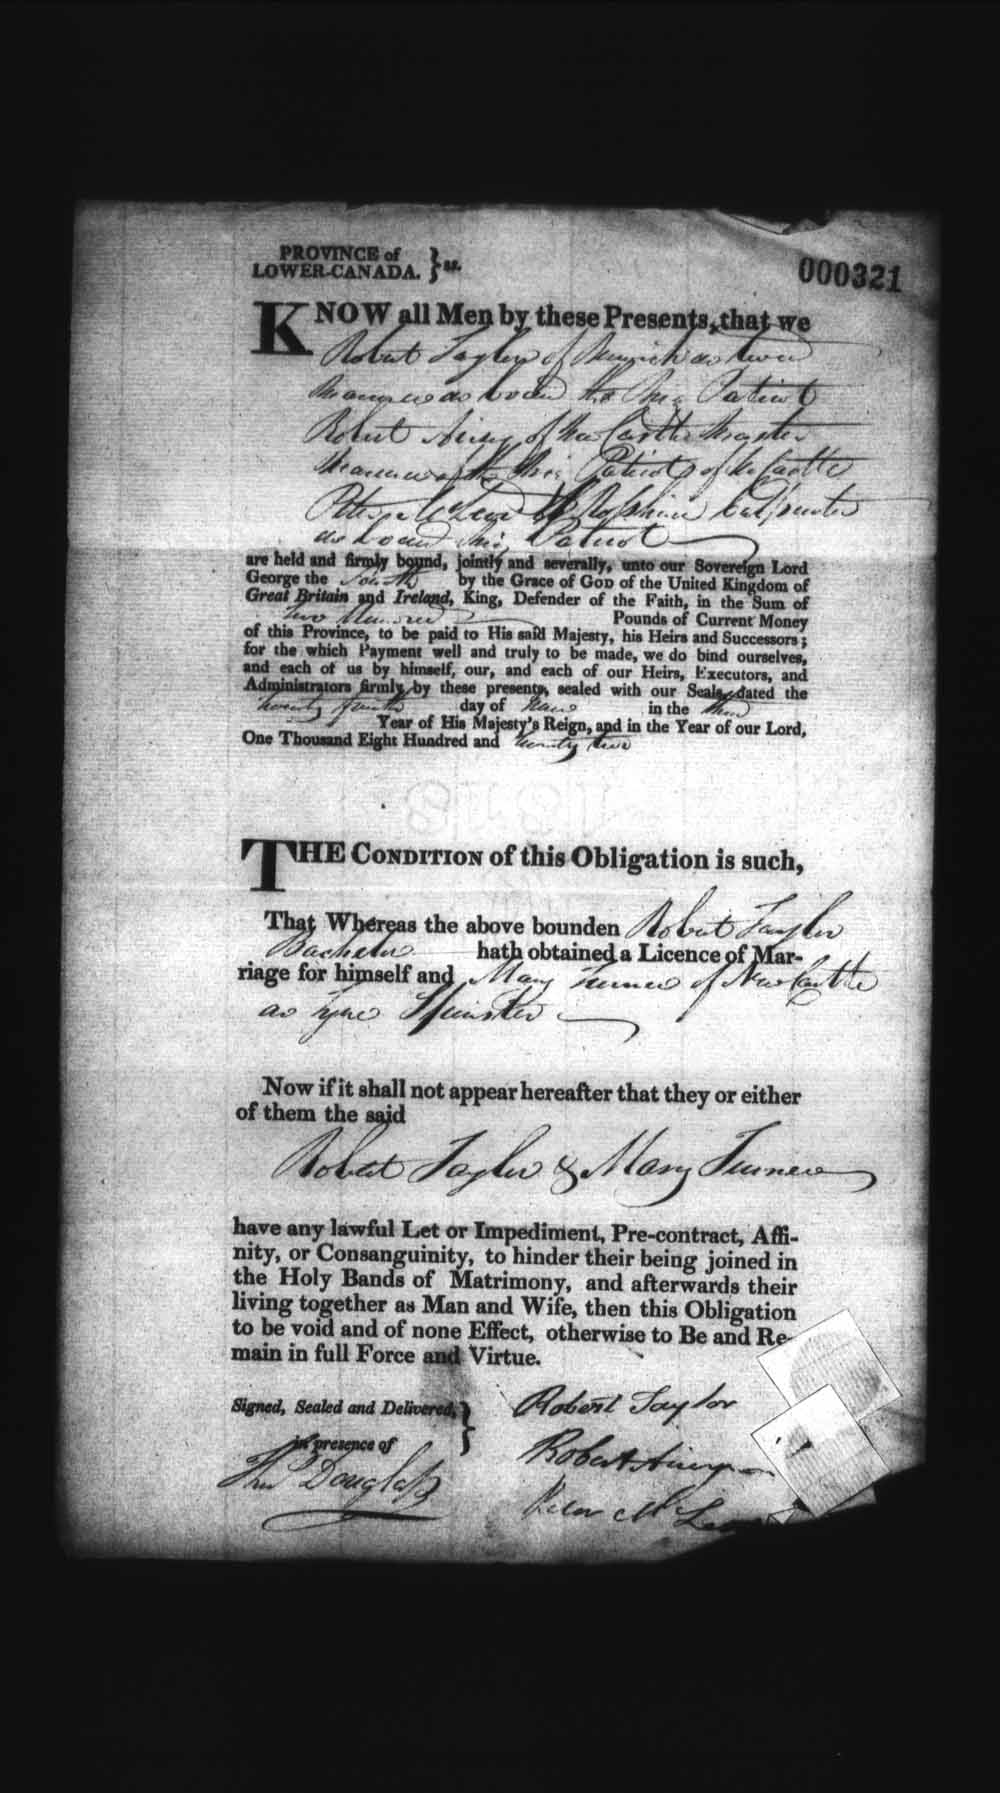 Digitized page of Upper and Lower Canada Marriage Bonds (1779-1865) for Image No.: e008236199